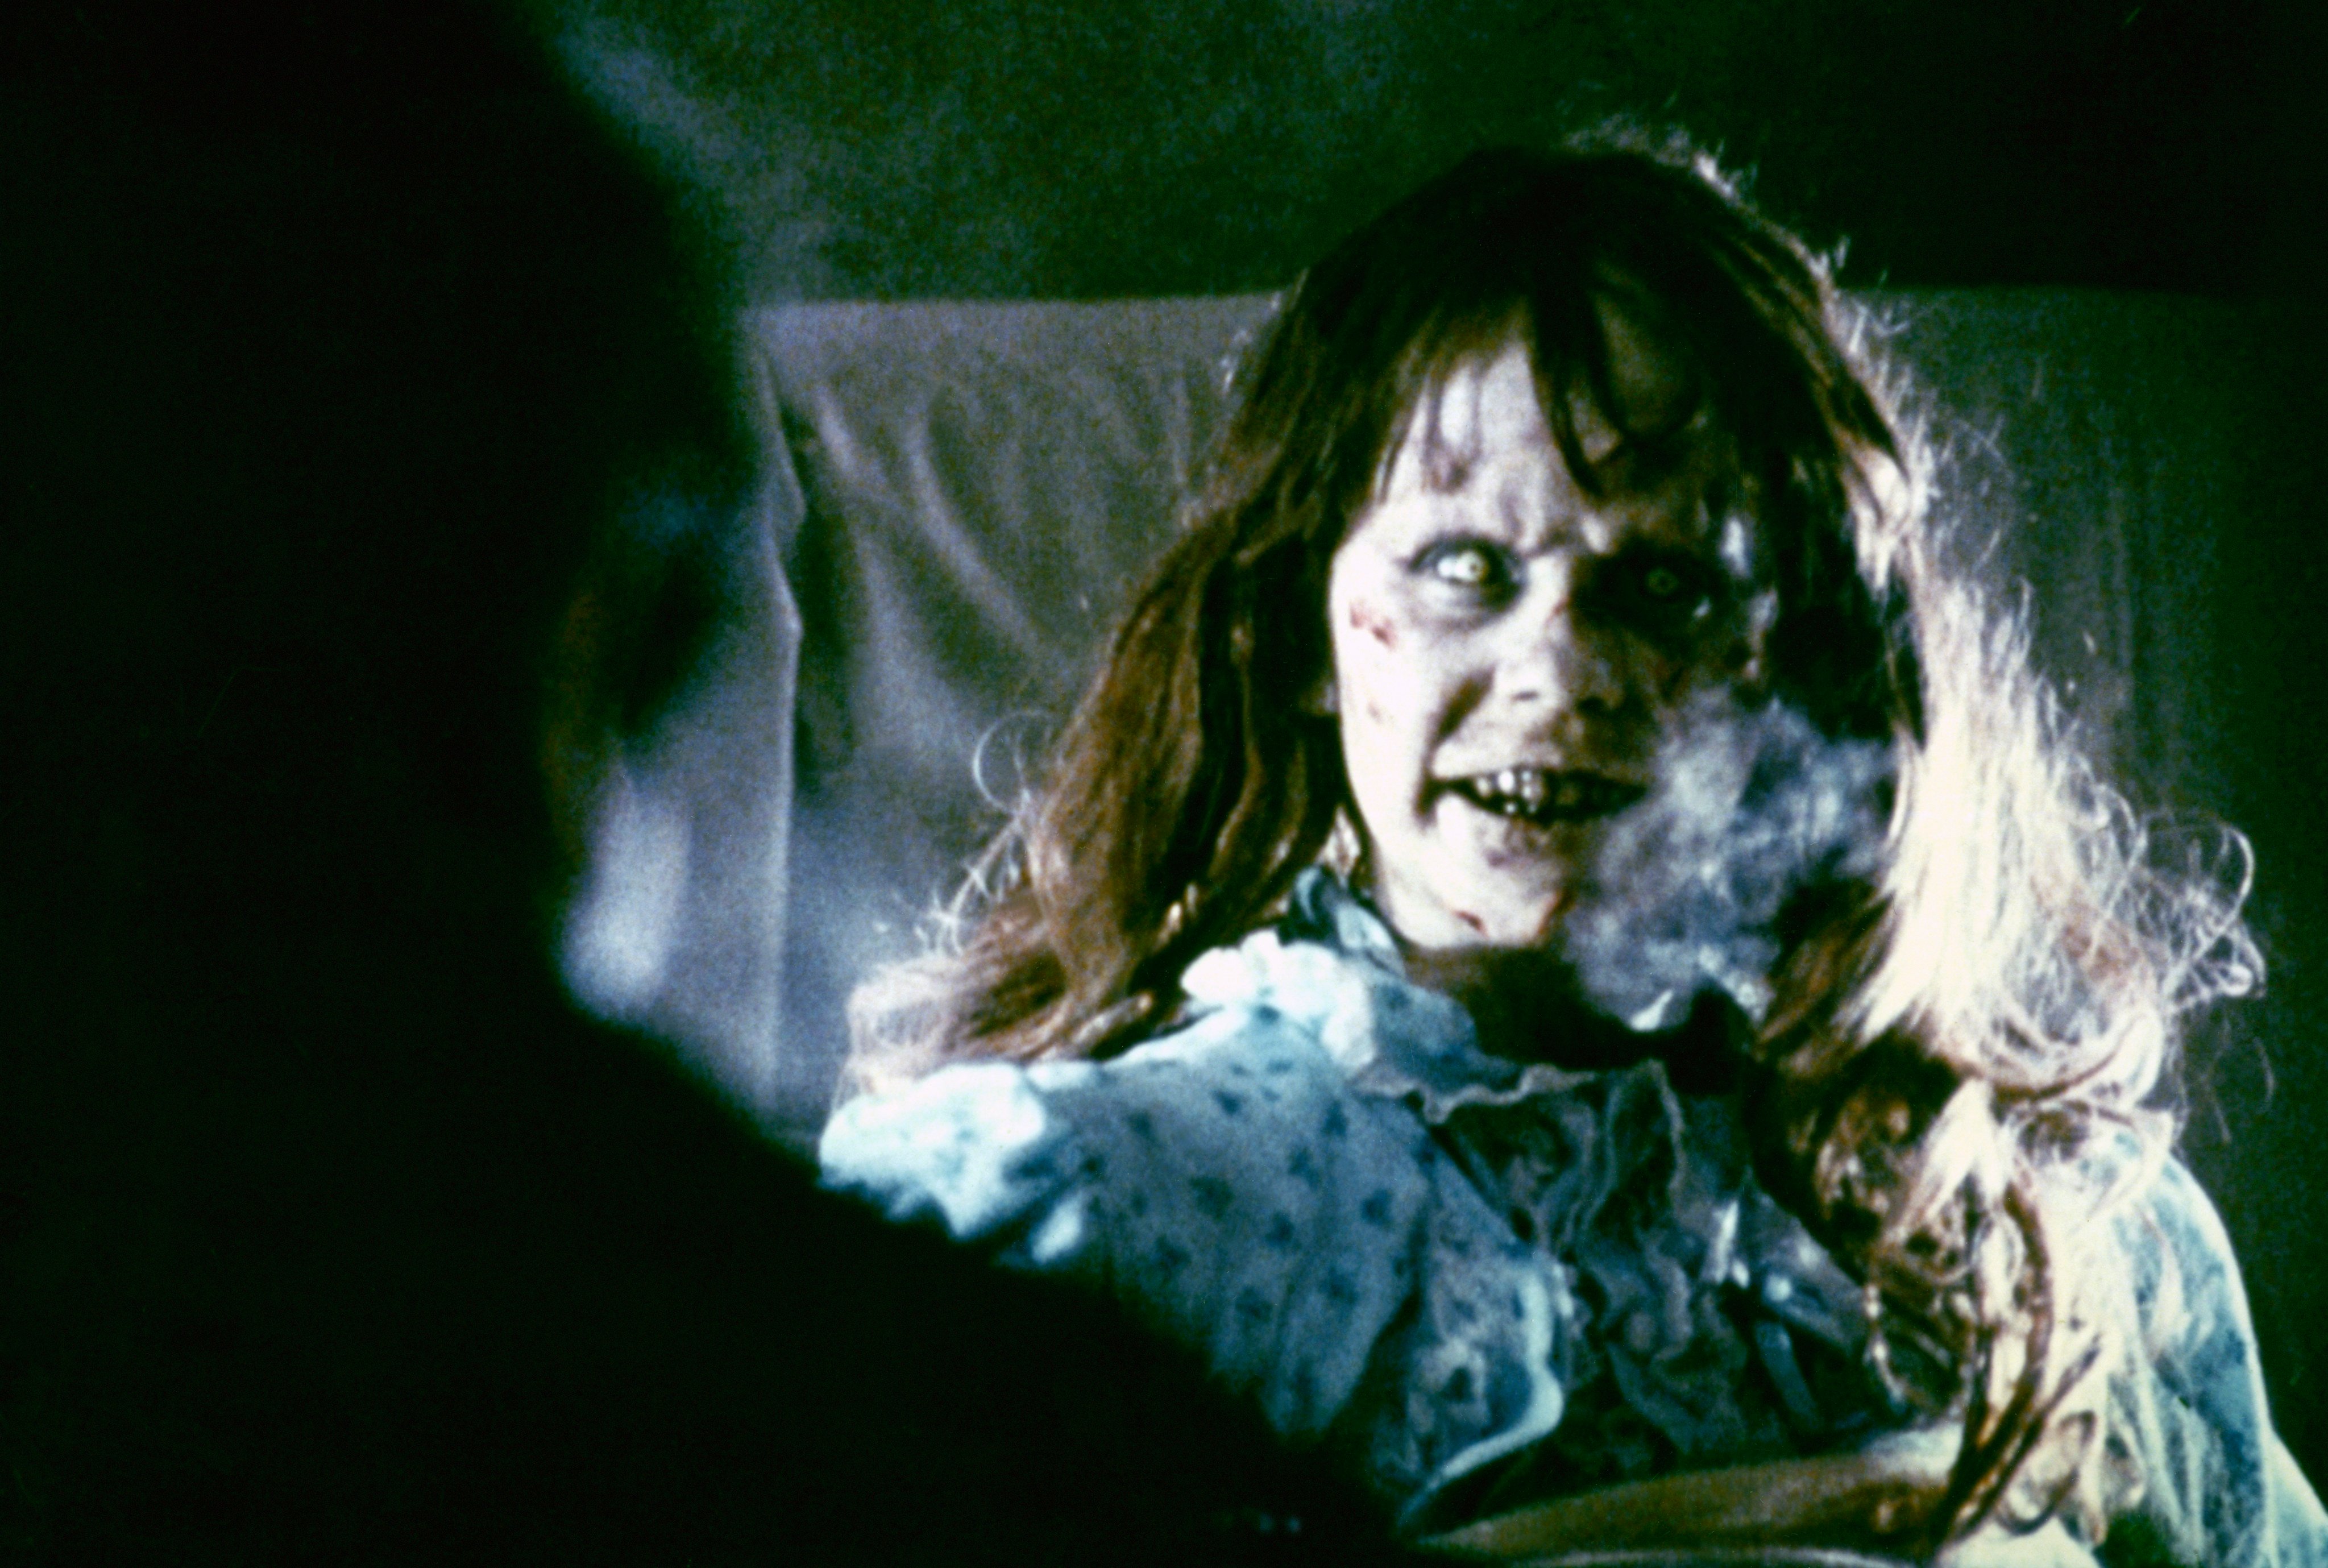 Linda Blair in a still from “The Exorcist”. Watching horror films like this 1973 classic can bring mental health benefits by helping release stress, build resilience and better manage real-life fears, according to horror fans and experts. Photo: Corbis via Getty Images